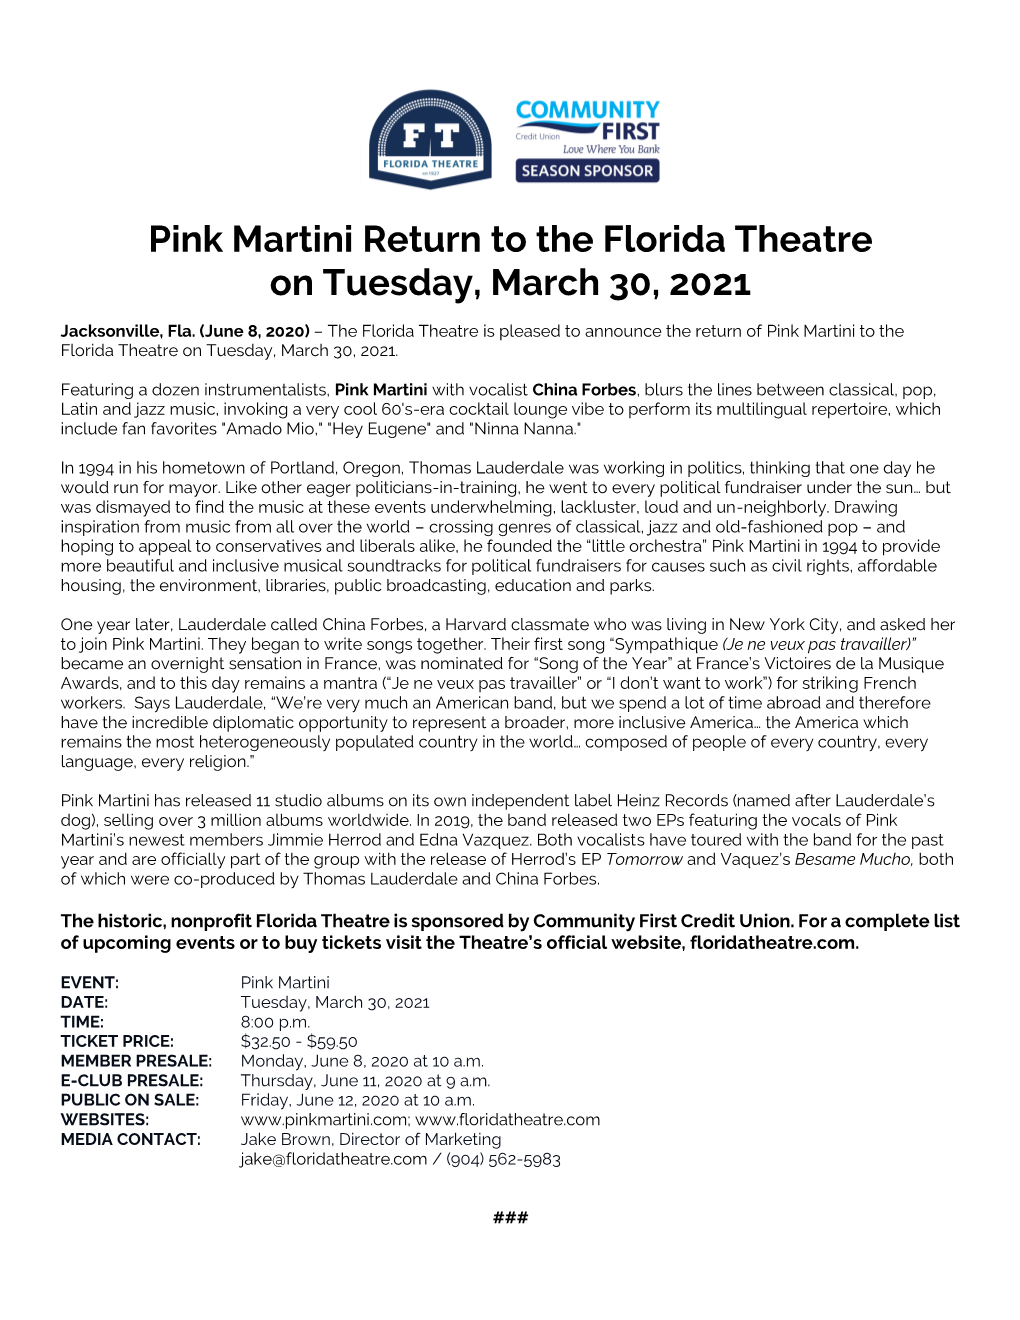 Pink Martini Return to the Florida Theatre on Tuesday, March 30, 2021